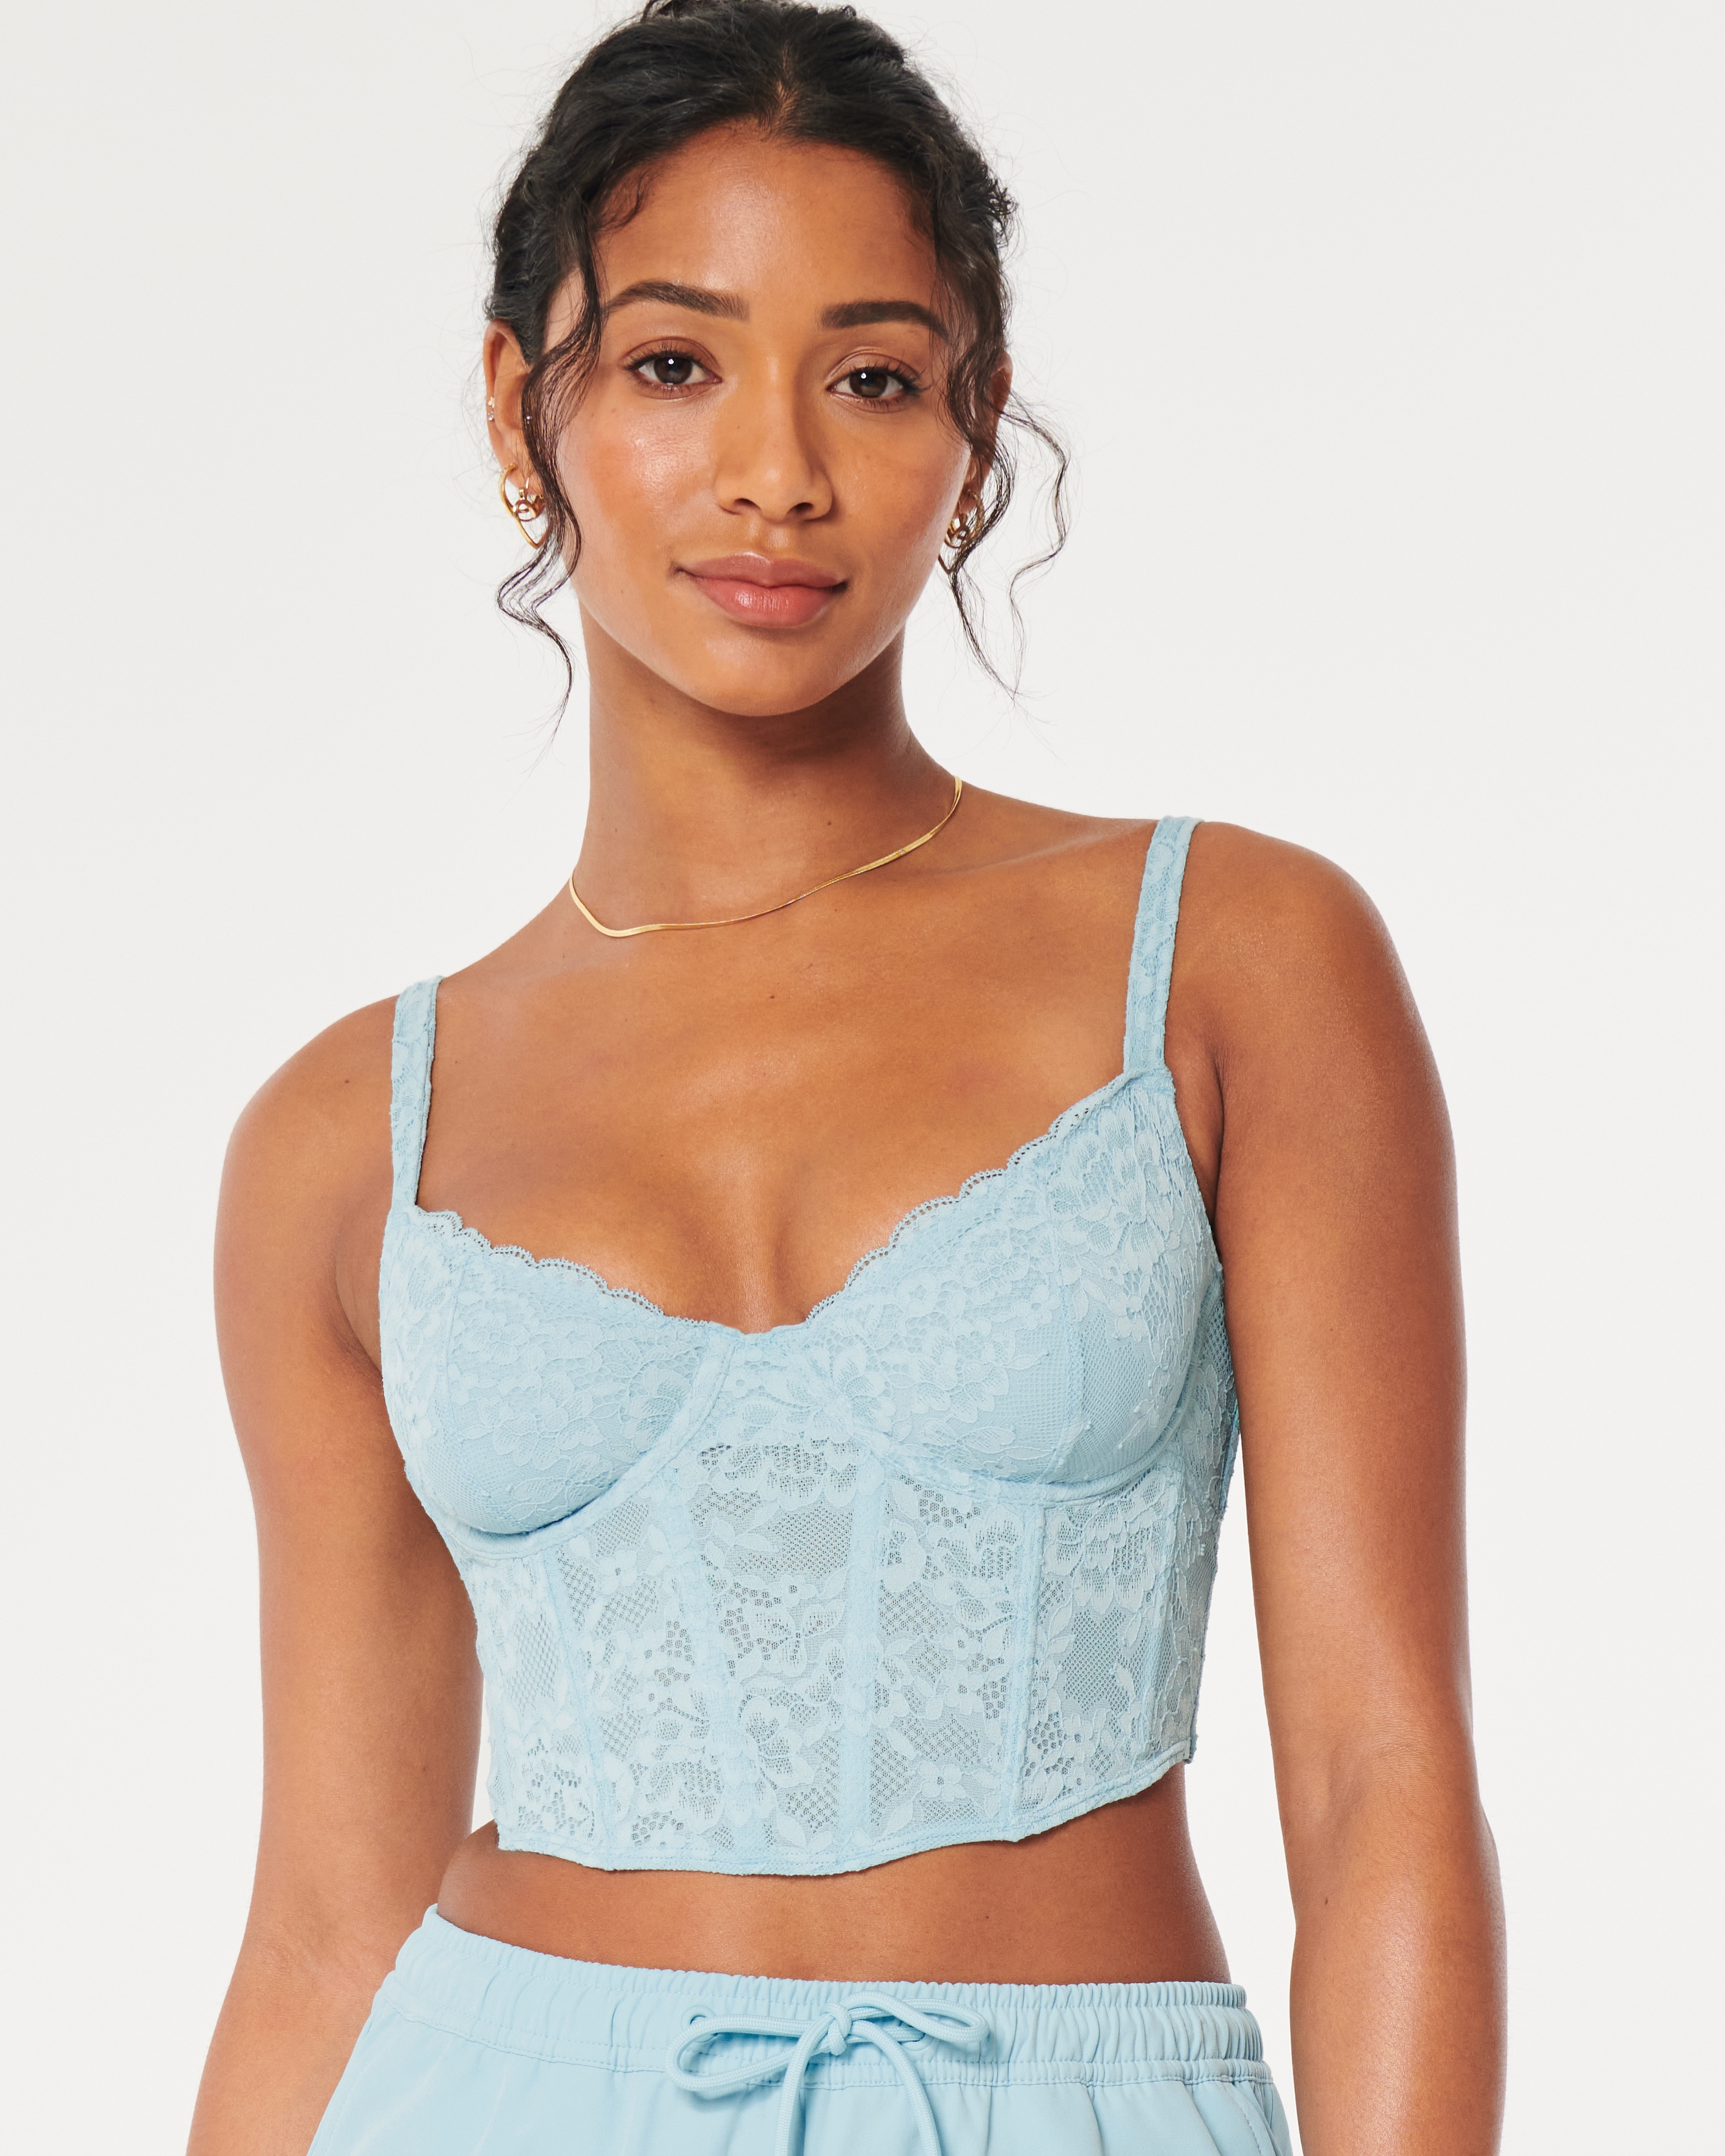 Gilly Hicks Lace Corset Bra Top